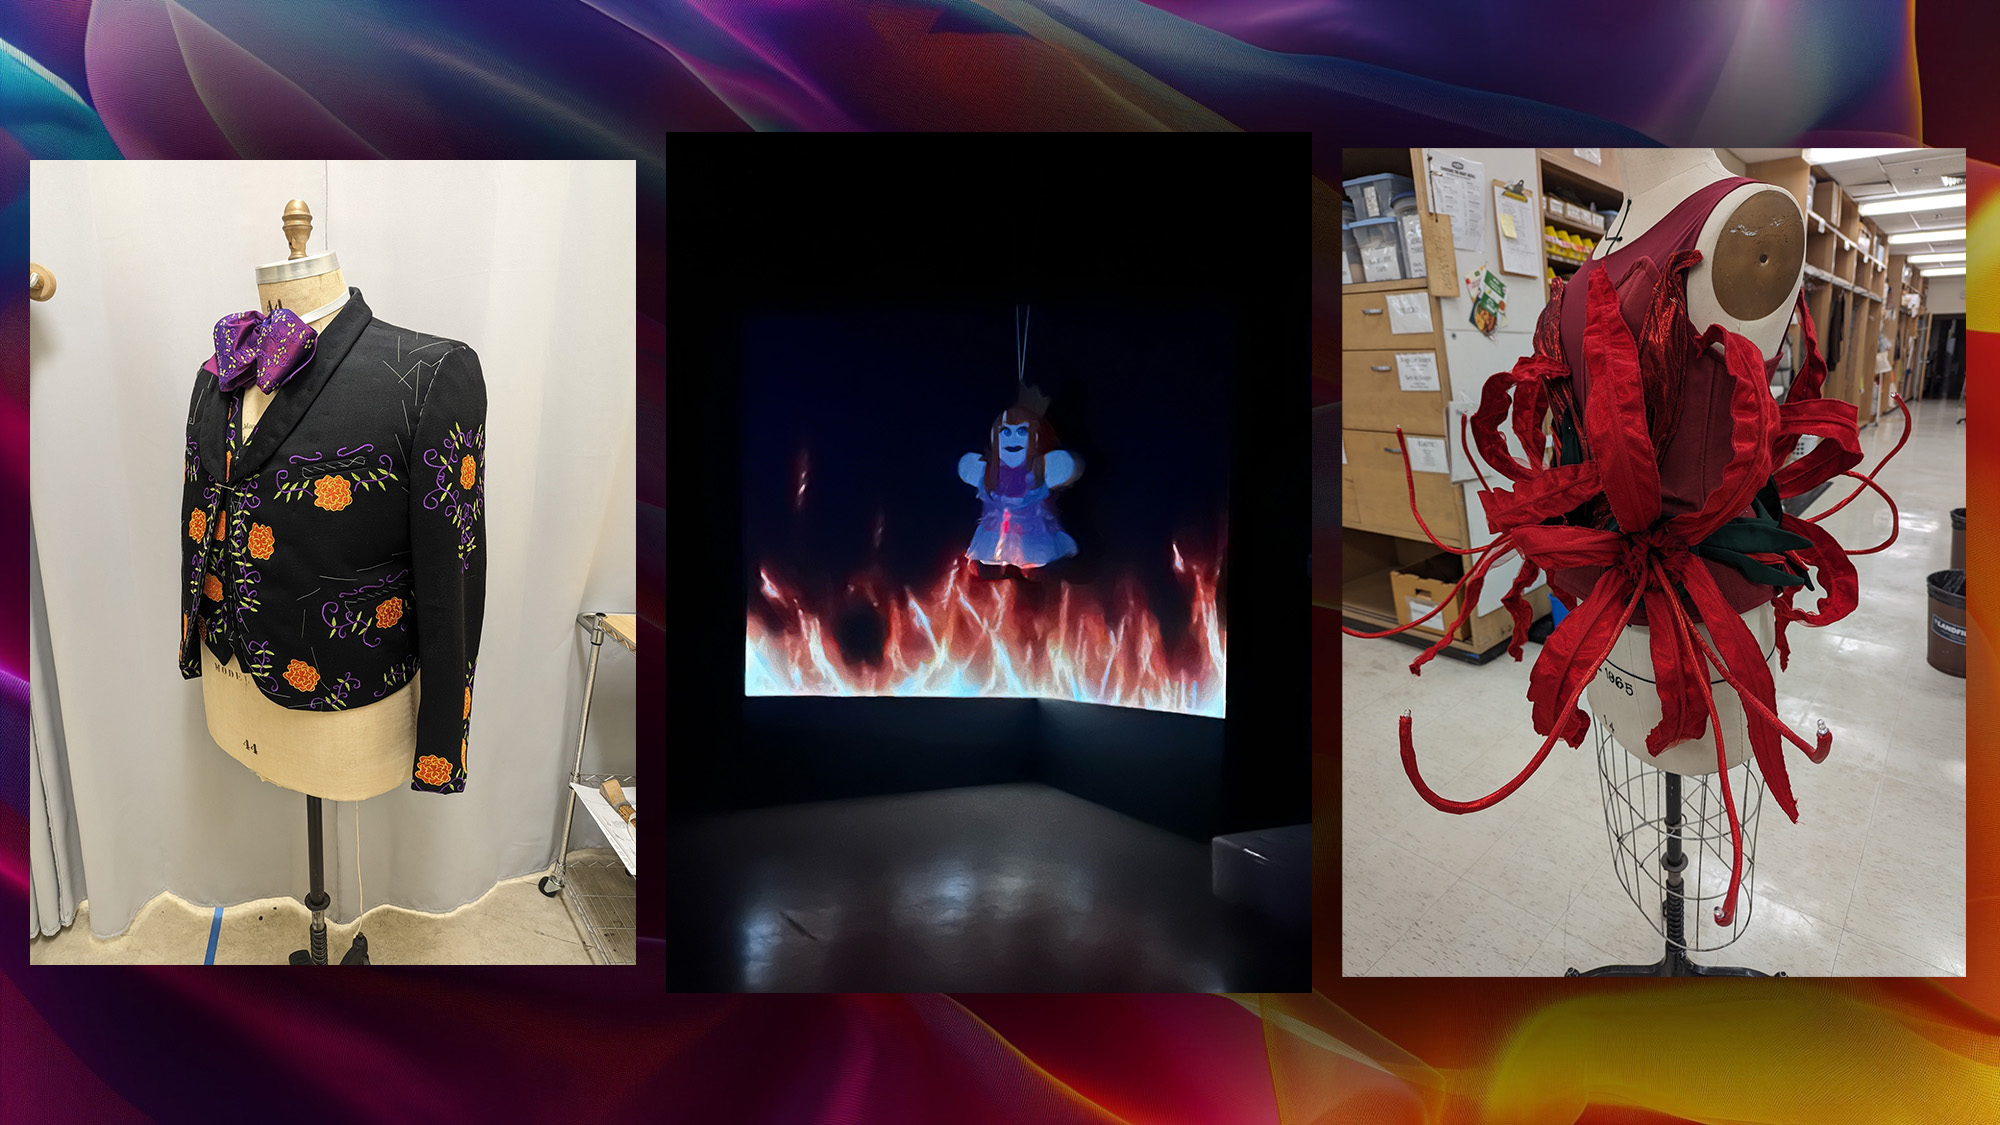 A multicolored field with three photos on it. The first image is of a Traje de Charro the traditional garment of a mariachi musician. The suit is black and embroidered with orange flowers and green leaves. The second image is of a small animated character levitating over flames. The third image is of a garment made of giant red spider lilies it is on a dress form and the flowers seem to bloom out of the bodice. 